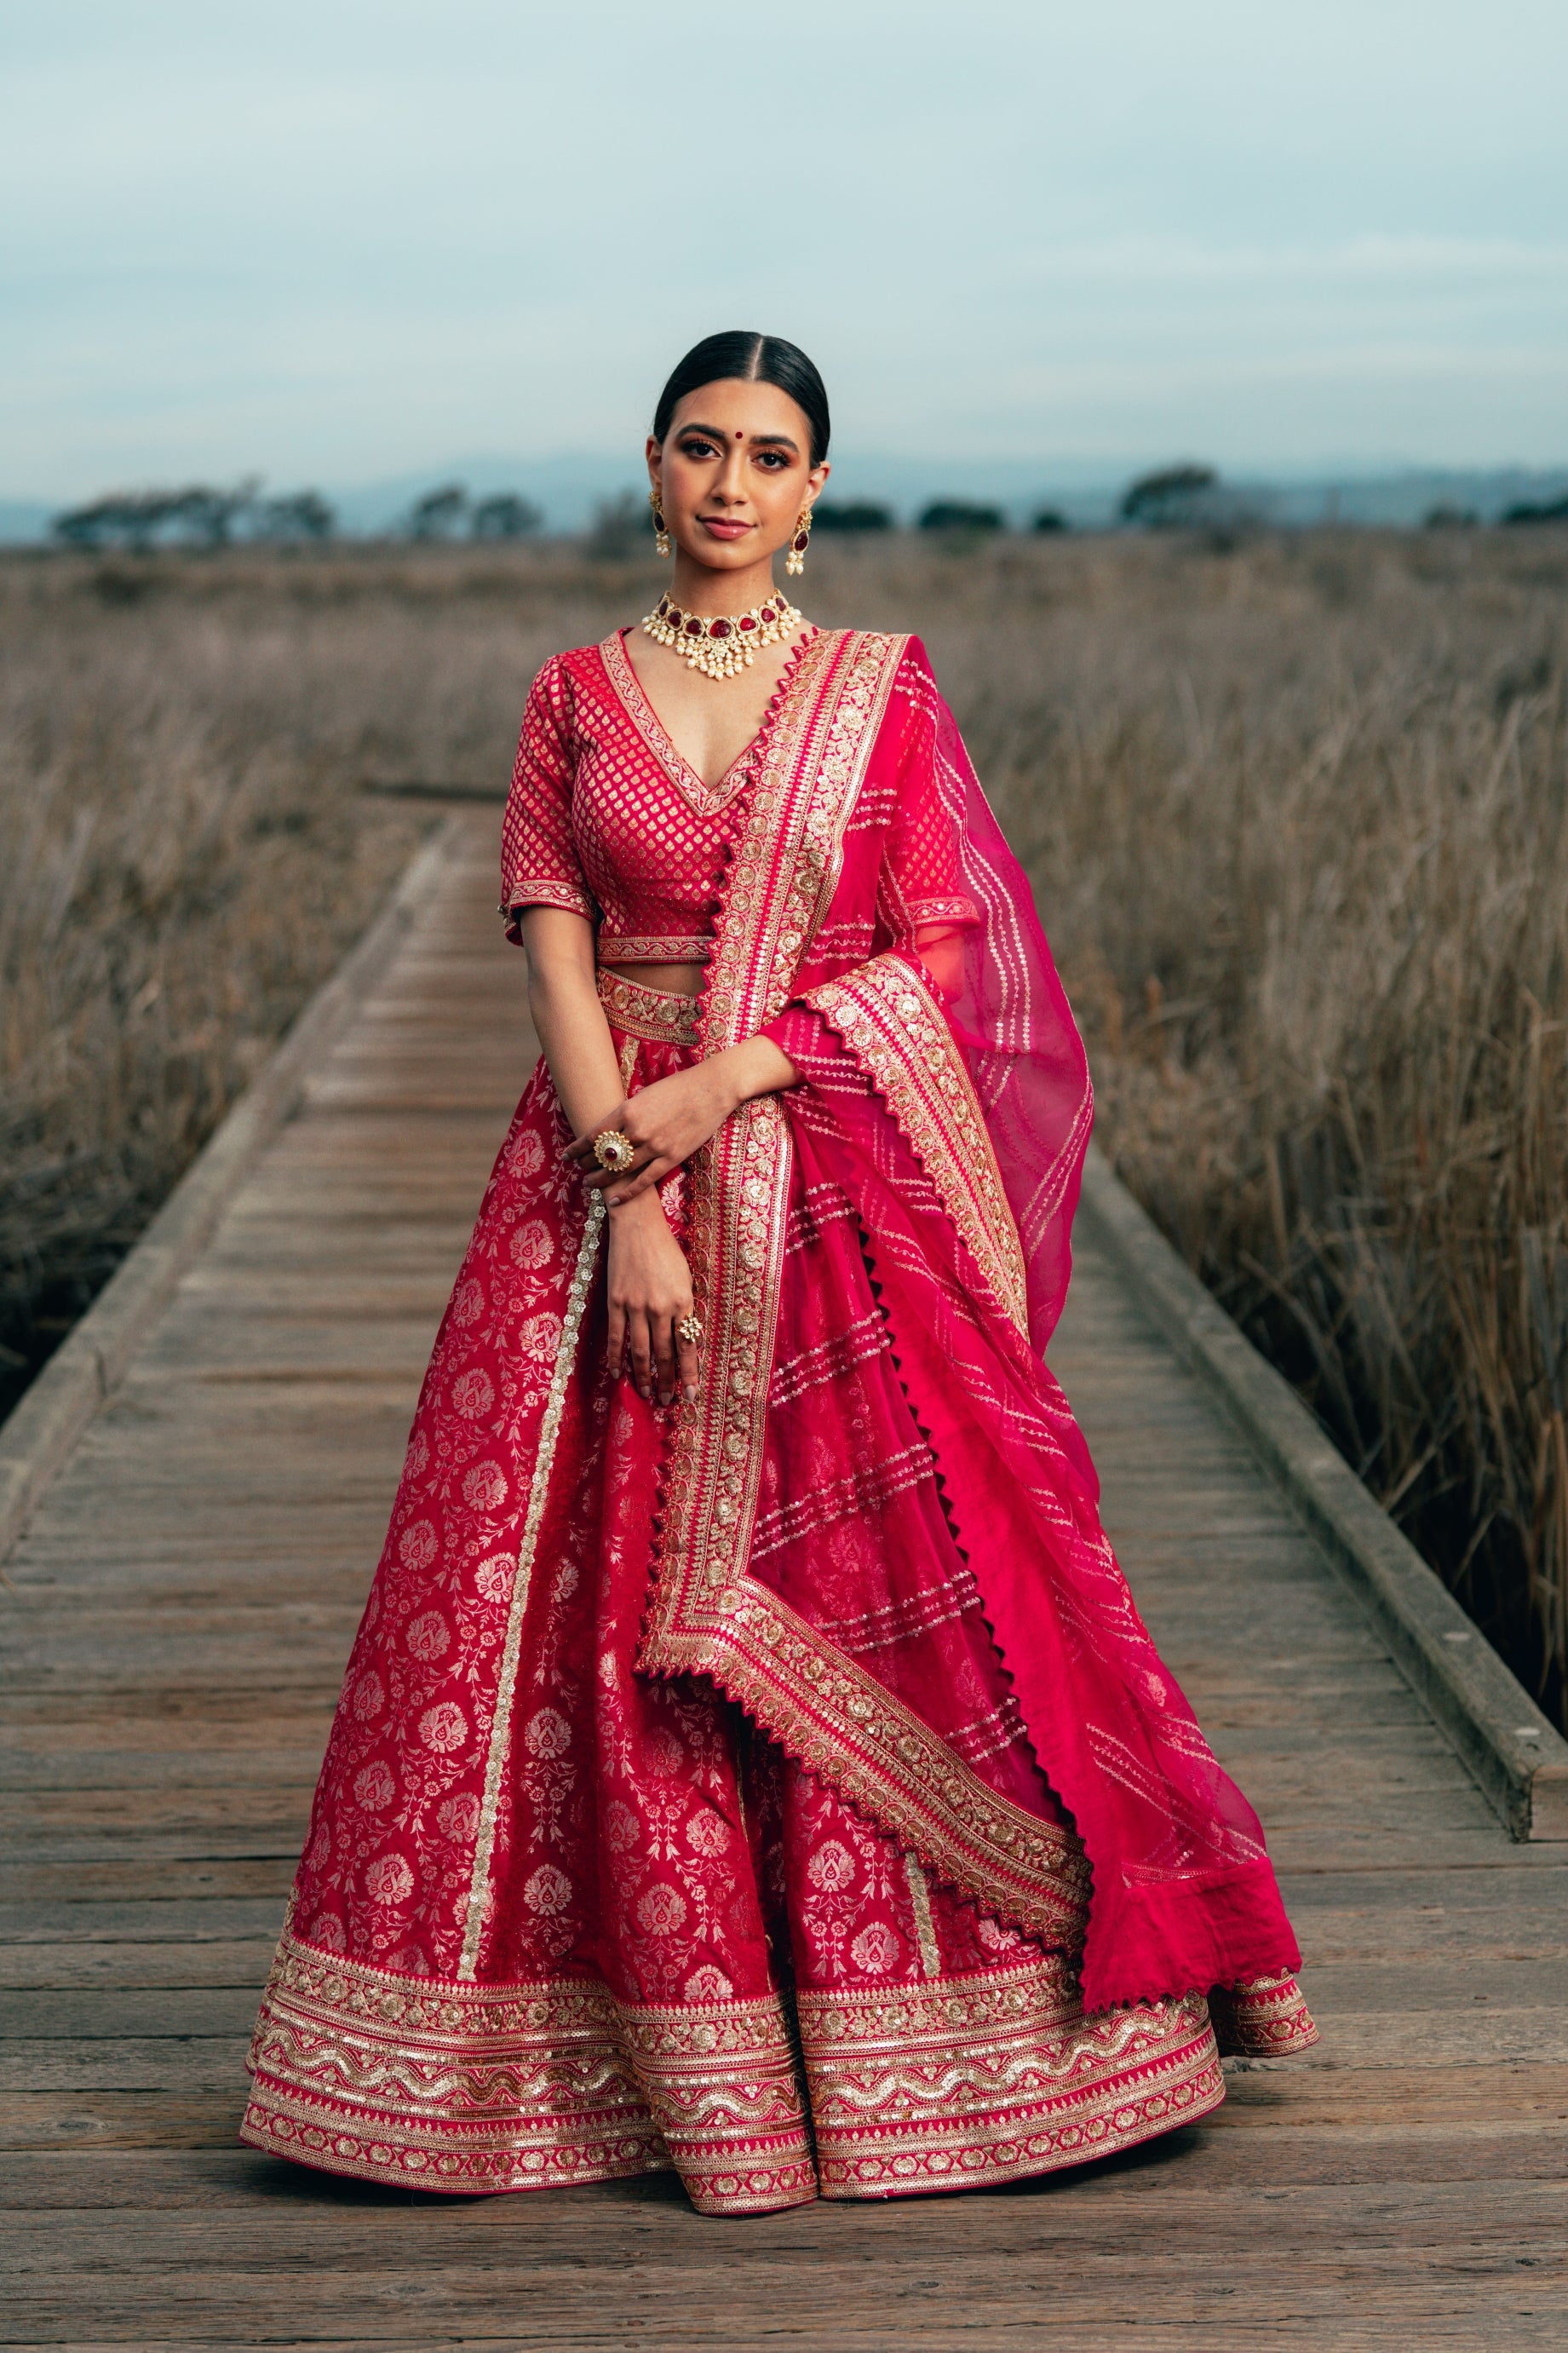 Different Types of Lehengas | Our Blogs